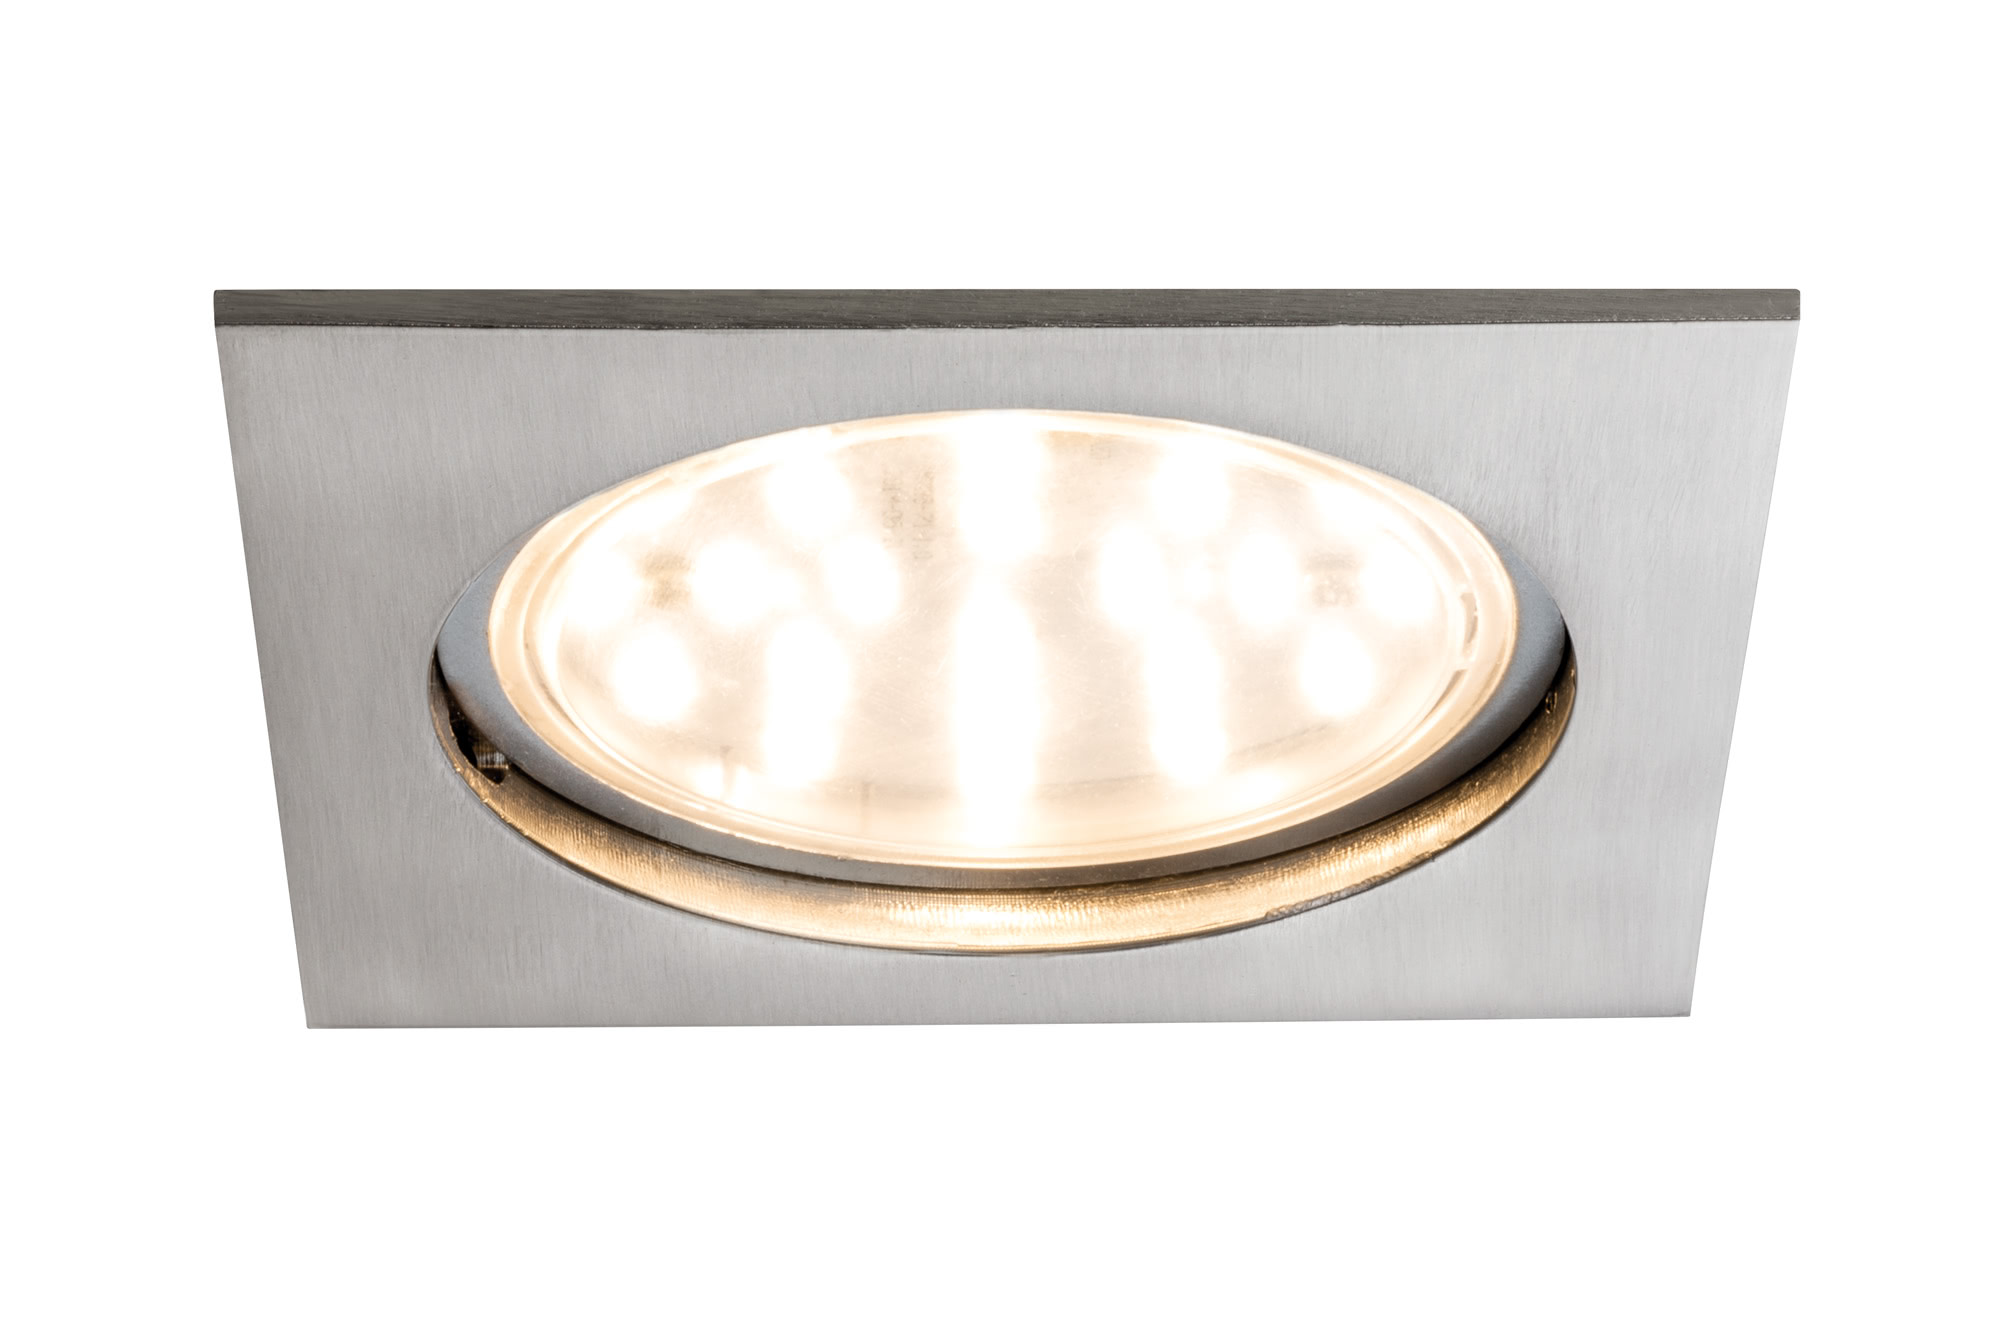 92784 Светильник EBL Set Coin LED 1x12W eckig Eis-g 75mm The Coins serve as innovative and user-friendly recessed spotlights that are suitable for new installations as well as replacing existing installations. They are exceptionally flat, meaning they can be installed in ceilings with a cavity of only 30 to 35В millimetres. From 50В centimetres to 5В metres or more вЂ” you determine the spacing between the lights! The simple and tool-free linking of single luminaires using quick clips save more than just time and stress вЂ“ thanks to energy-efficient LED technology with very lower power consumption, the Coins are also easy on the wallet. The dimming function enables you to adjust the brightness to your individual mood and ensures bright light to work in and a cosy living atmosphere. 927.84 Paulmann